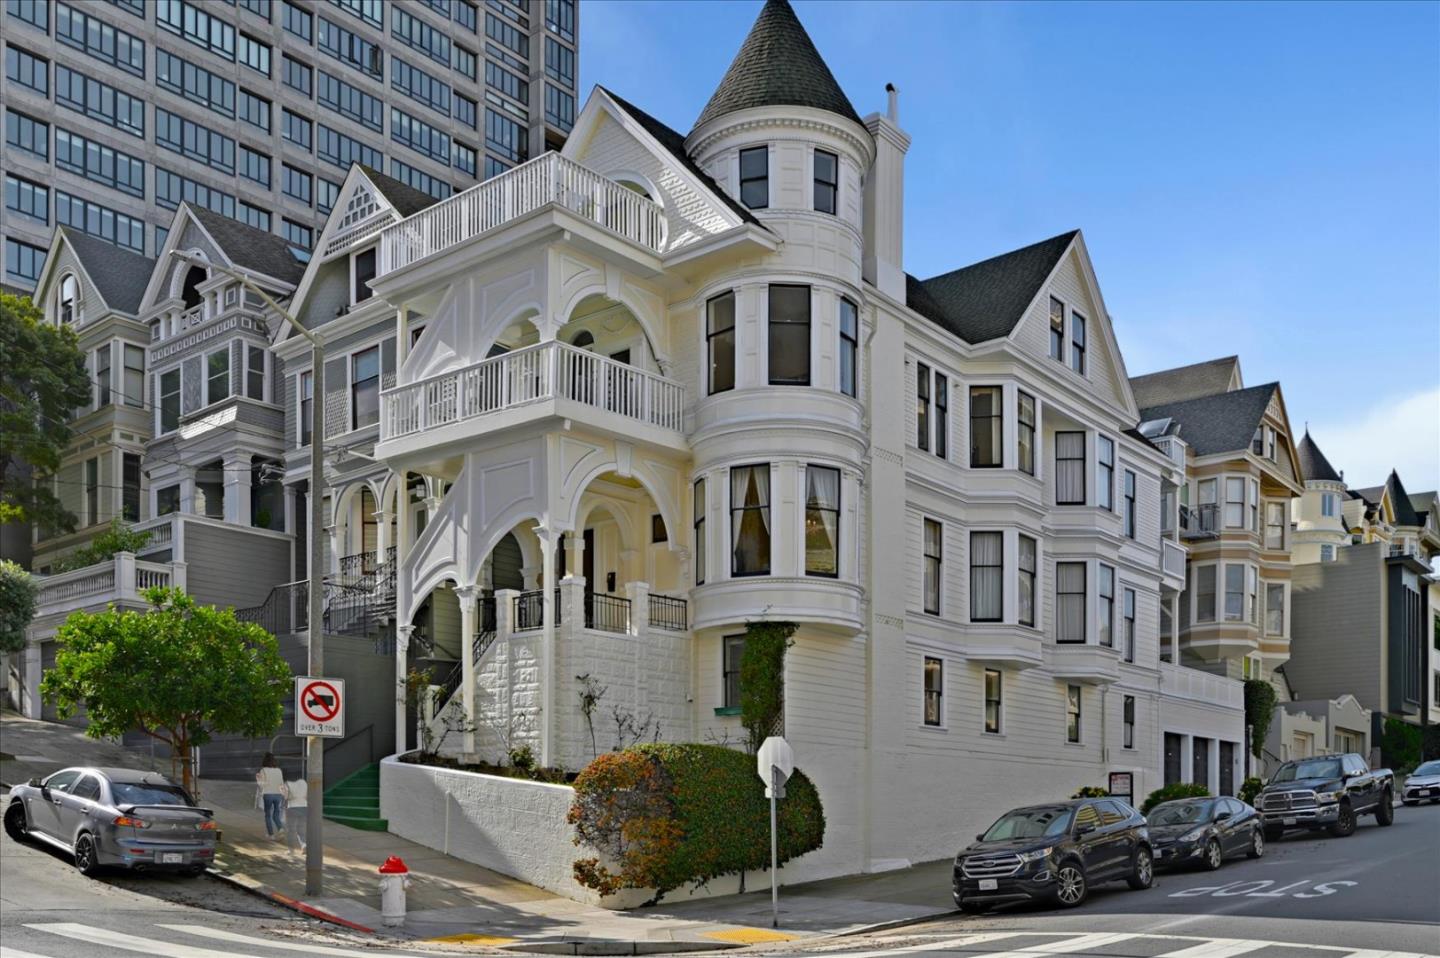 Own a piece of San Francisco history! First time on the market in 53 years, this stunning Victorian home has a turret, period details, and is situated on a premier Pacific Heights corner only 2 blocks from Union Street. Formal entry, 12 ft ceilings, stained glass windows, fireplace, ornate plasterwork, & intricate millwork. The adjacent living room & dining room act as a double parlor, with original pocket doors & many windows providing natural light. Upper floors have bay views & the expansive decks provide perfect outdoor living areas. Spacious patio above the 3-car garage is the perfect place for entertaining. Laundry & office with half bath & storage on ground floor. Originally a single-family home now has 3 permitted units (no Ellis Act.) New owners will have to decide how/if to modify for their purpose. All 3 units have separate addresses & entrances: 2665 Laguna (Front) 4 BR/3.5 BA ~2320 SF; 2005 Vallejo (Back) 3BR/~ 2.5 BA ~1850 SF; 2663  Laguna (Ground Floor) 1BR/1BA ~665 SF.